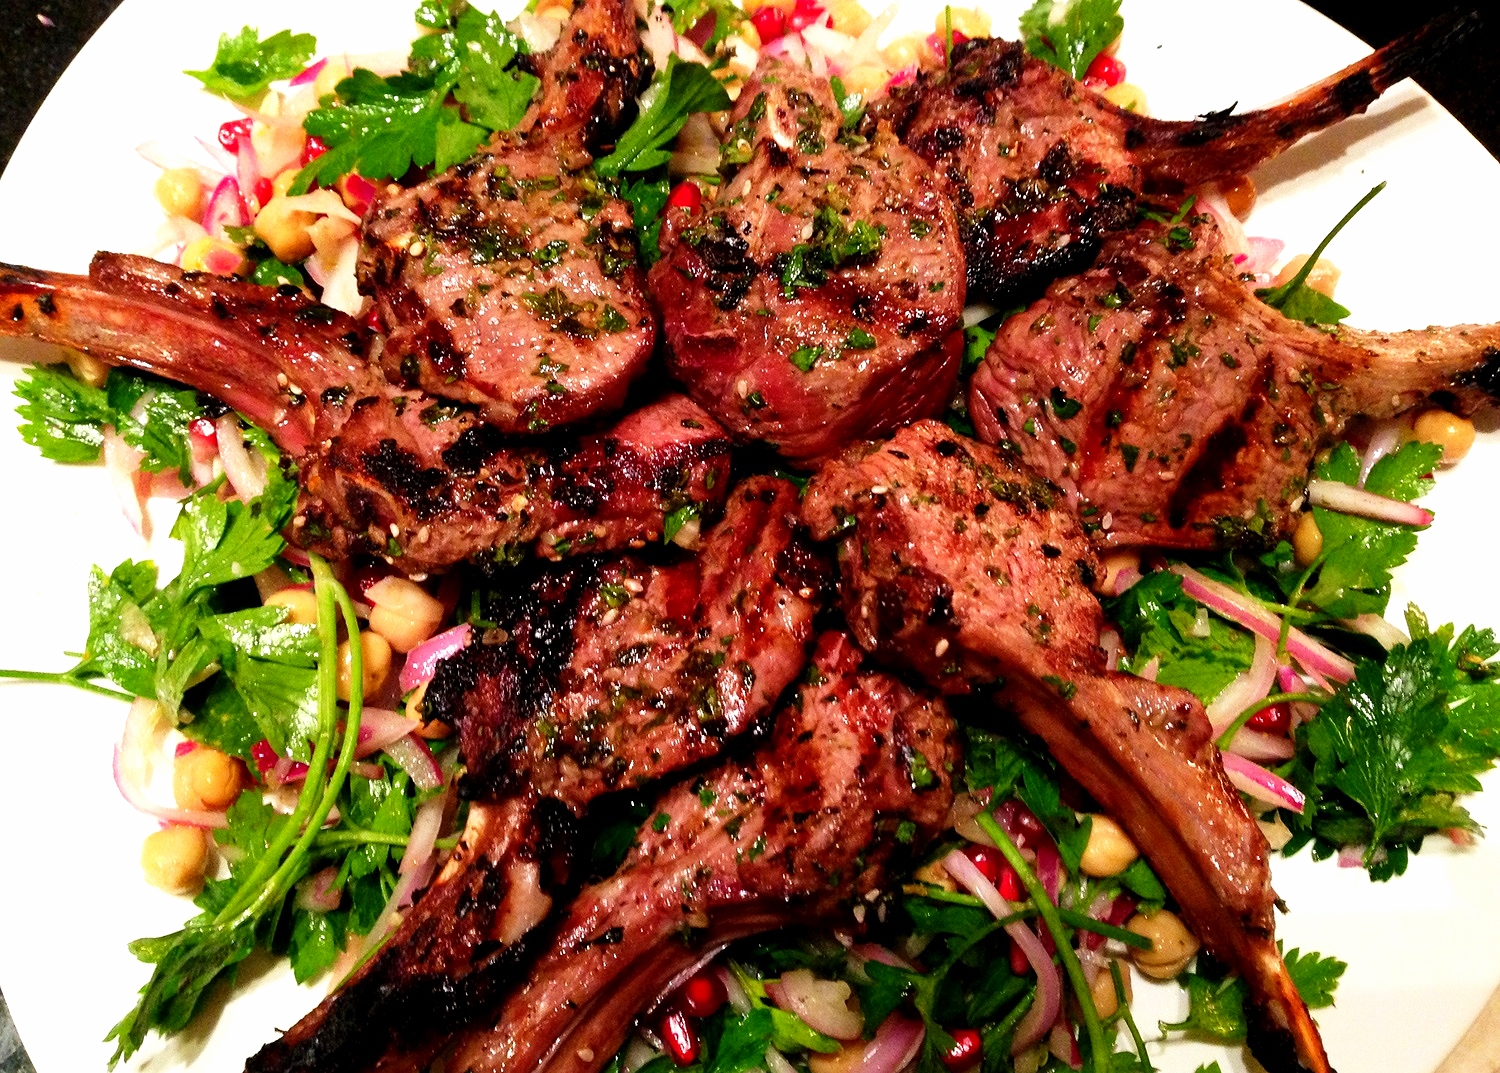 Moroccan spiced grilled lamb chops on parsley, chickpea, red onion, and pomegranate salad